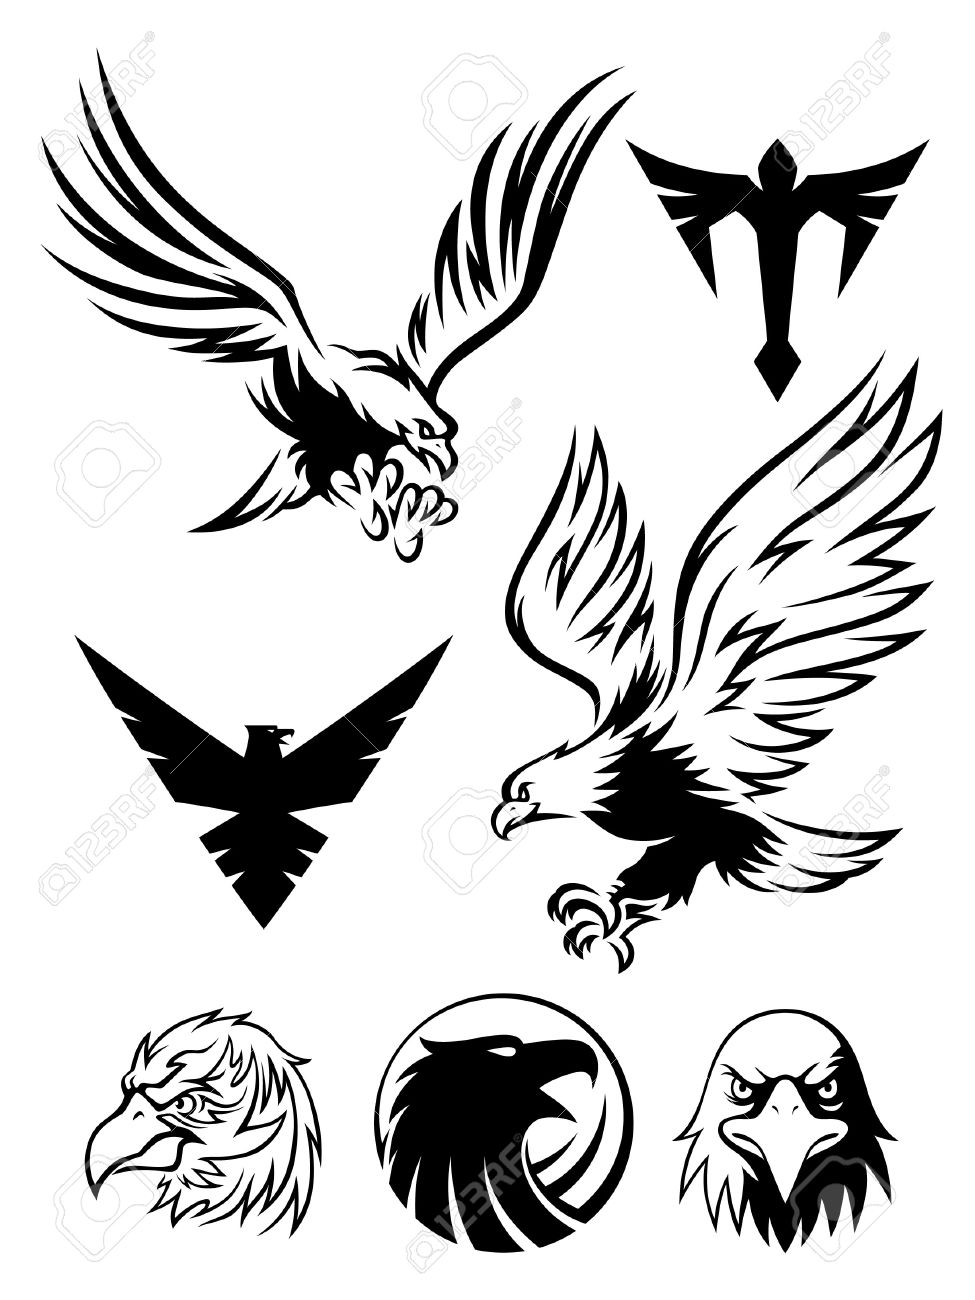 26,348 Eagle Stock Vector Illustration And Royalty Free Eagle Clipart.